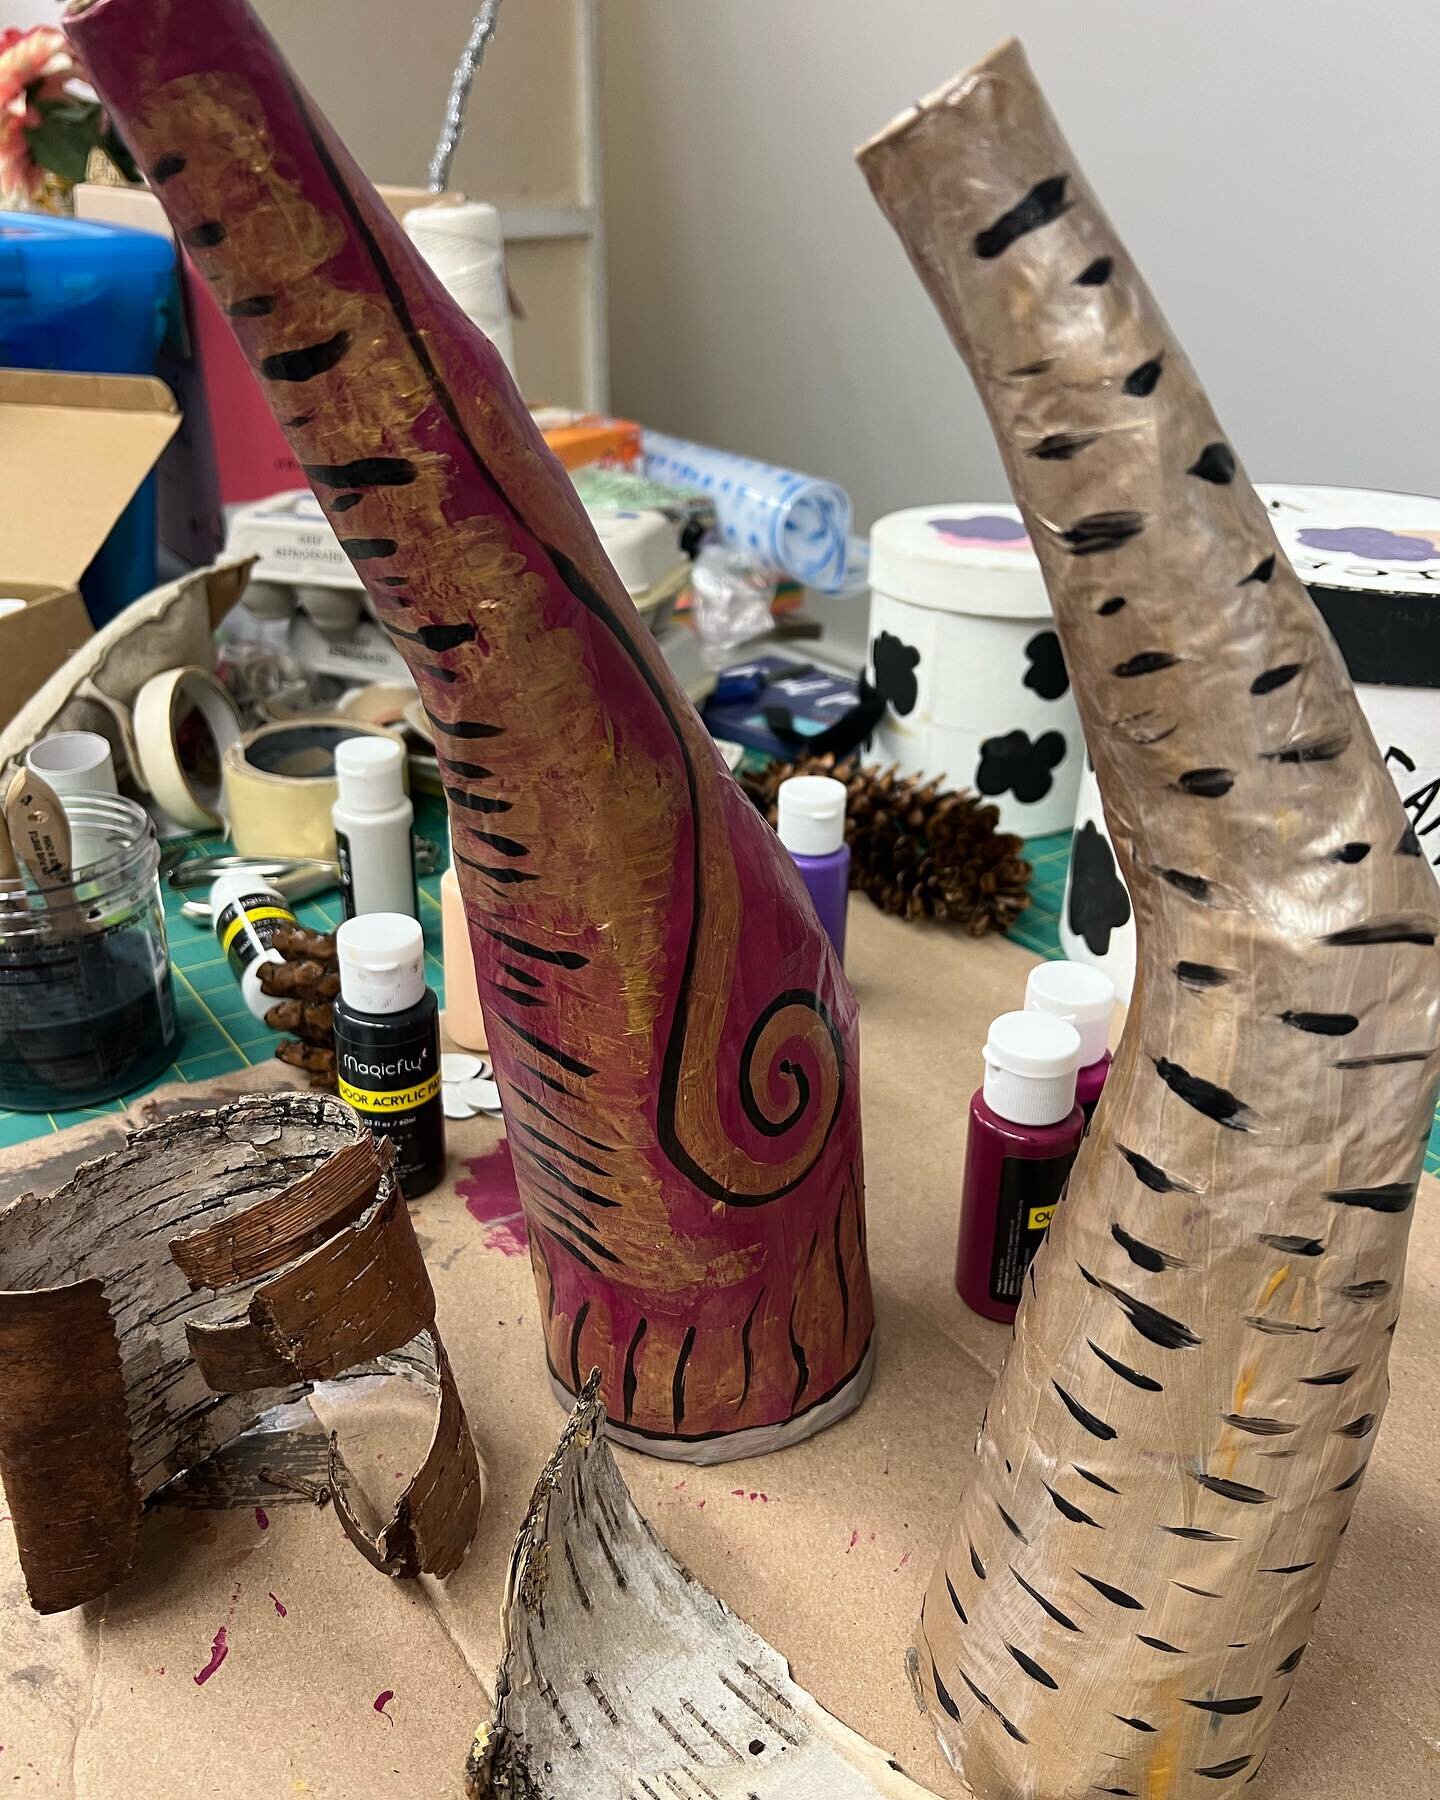 Hearing horns made by Robin McCahill&hellip; I just finished painting them now for our Enchanted Walk @bethellandtrust Franc&rsquo;s Preserve tomorrow, Saturday, Nov. 11 from 1:30-3:30pm.  Listen to the forest!  Here the creatures that live there&hel